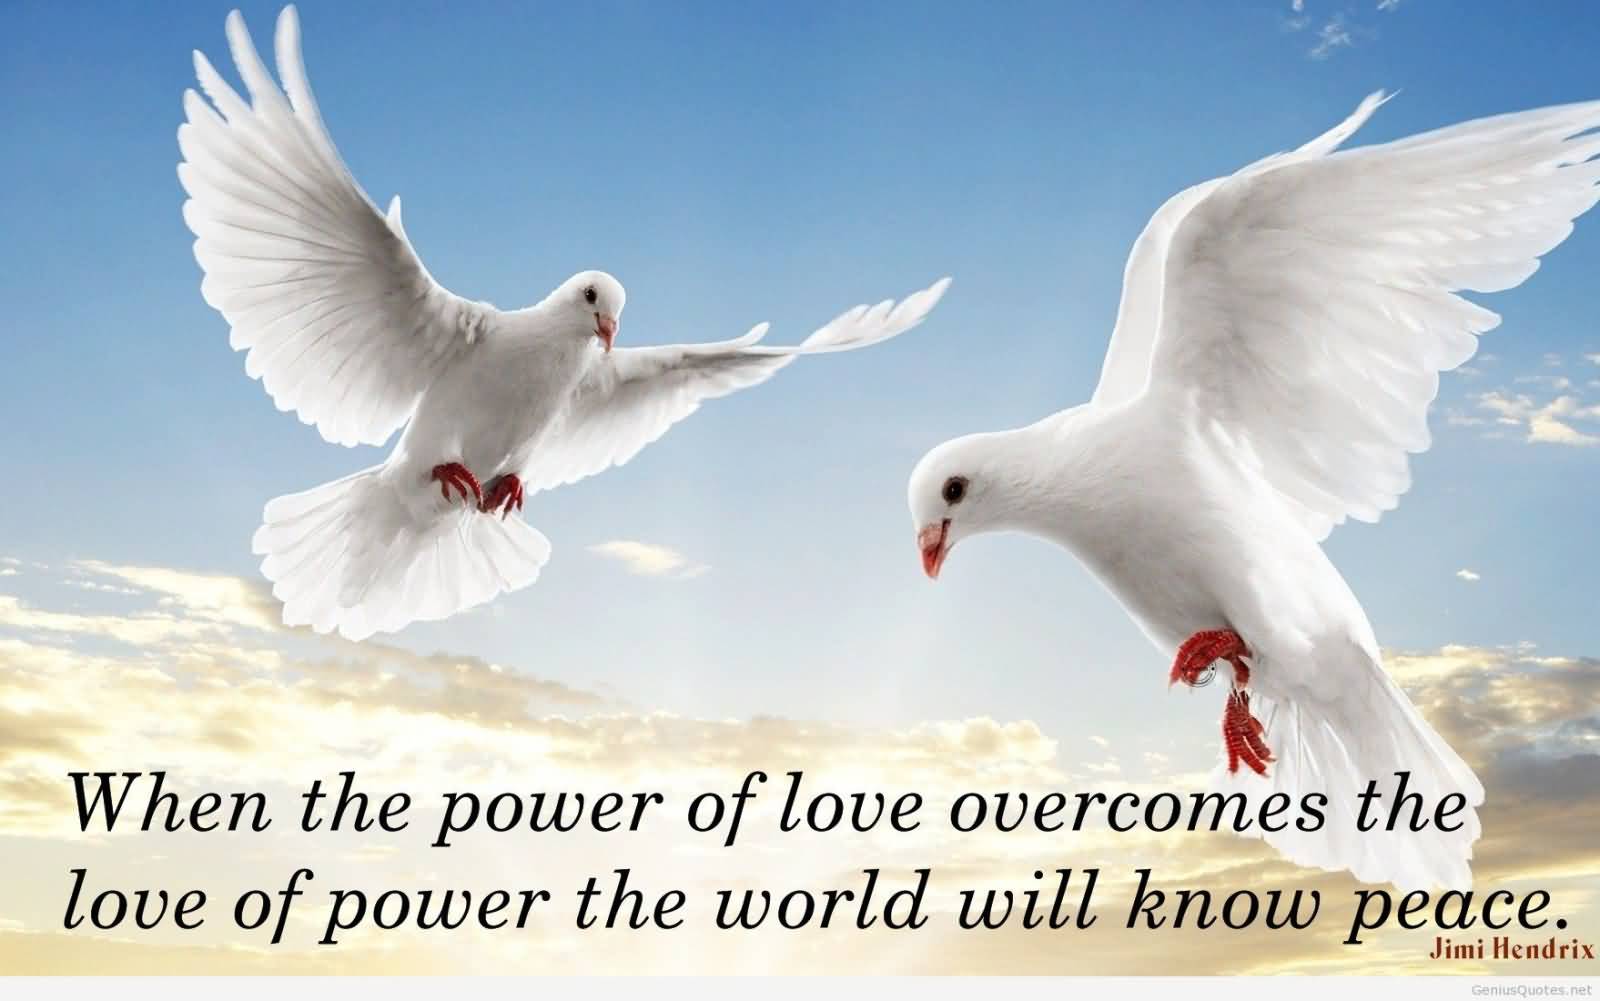 When the power of love overcomes the love of power the world will know peace.  - Sri Chinmoy